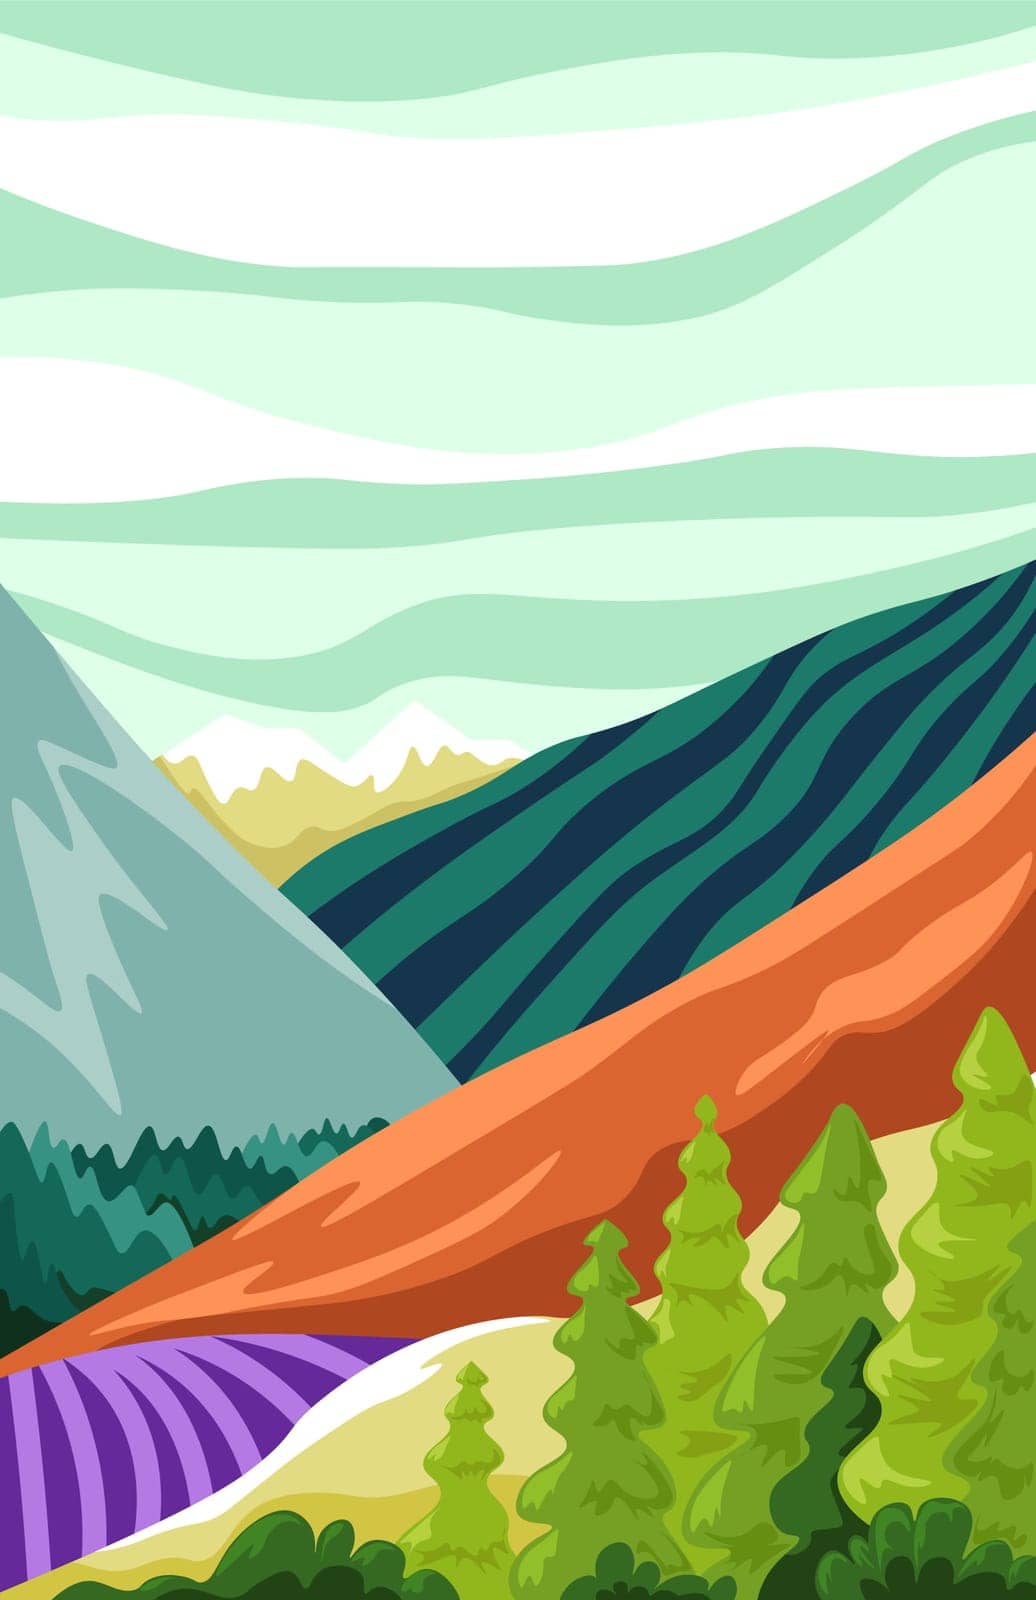 Nature landscape with mountains range and forests, cloudscape and fields. Natural serenity and tranquility, rural area countryside location for tourists and hikers. Vector in flat style illustration